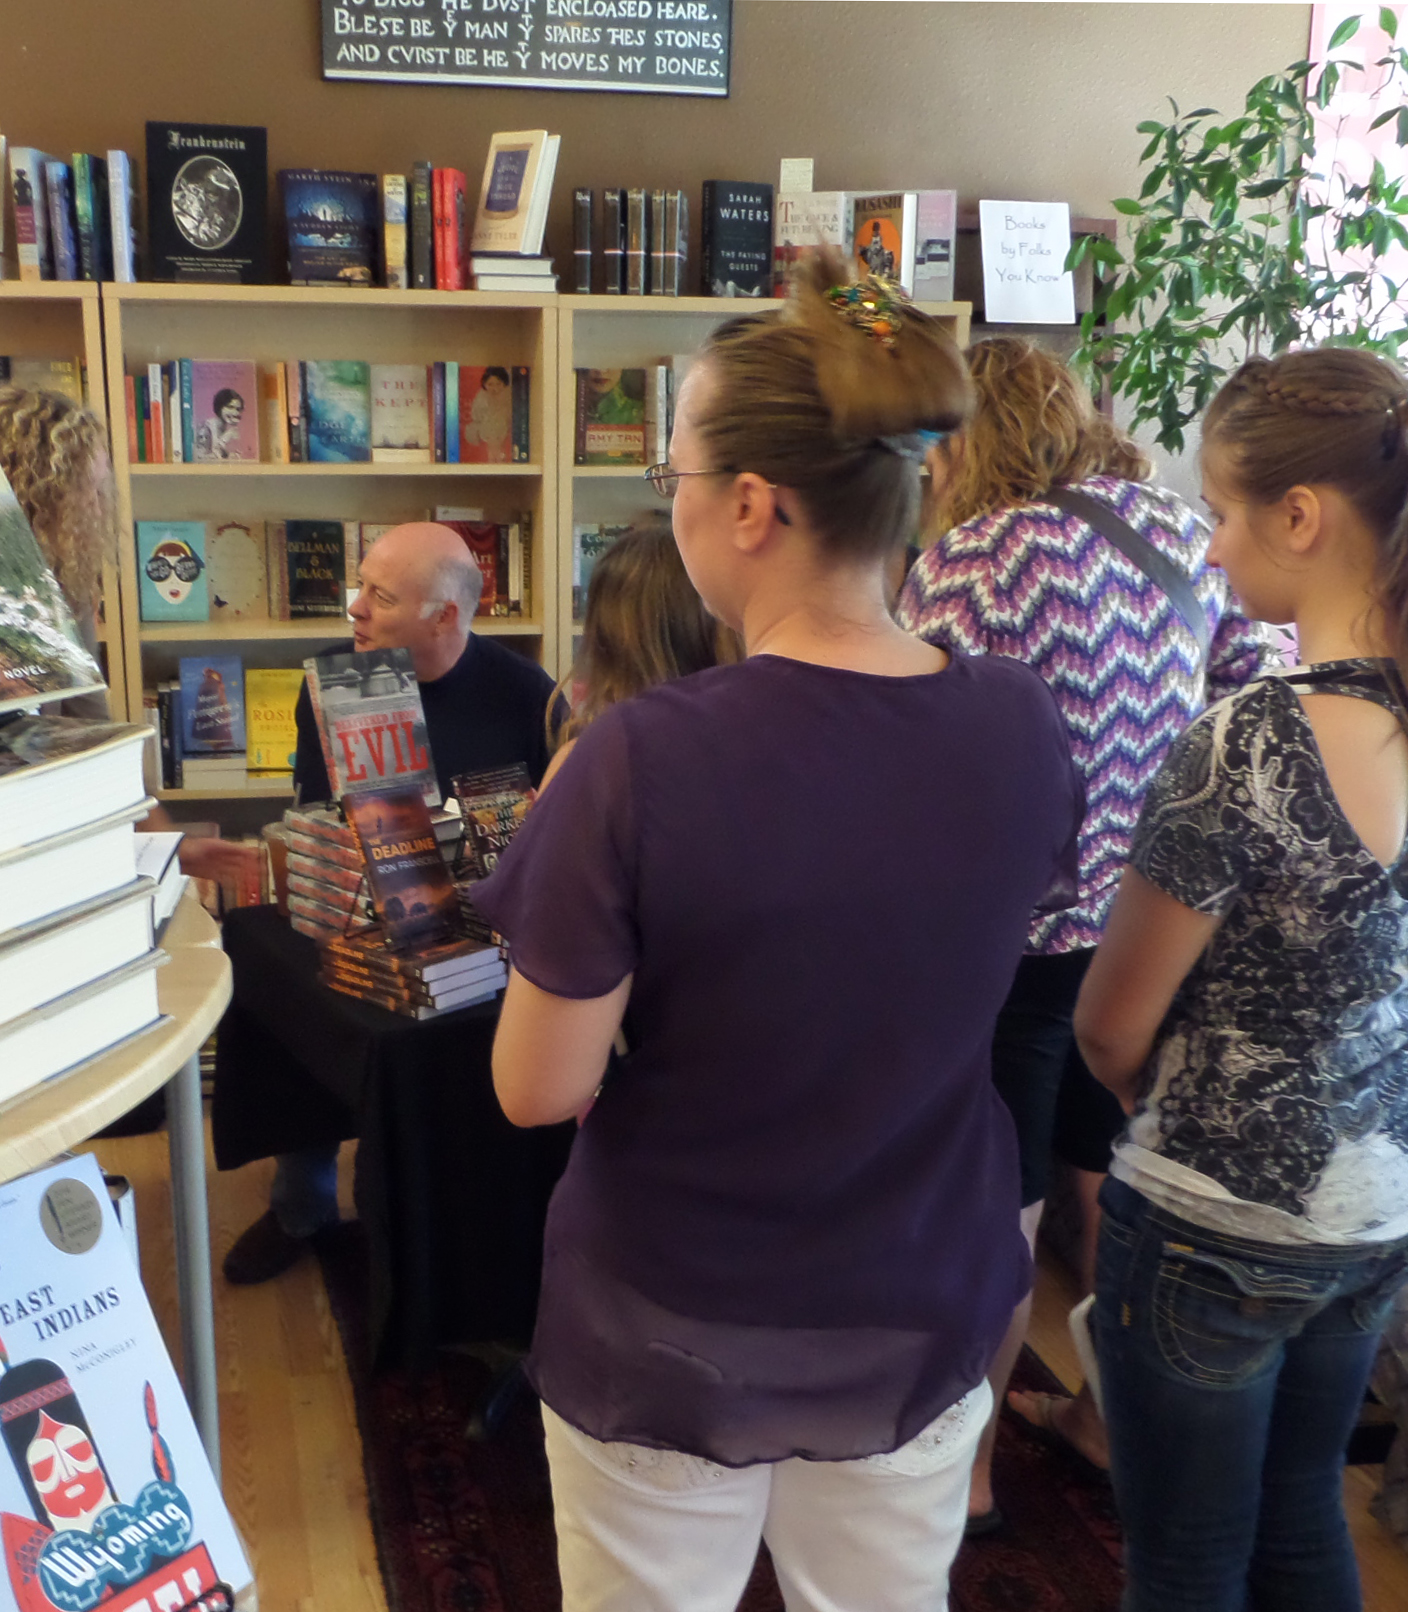 Wind City Books signing